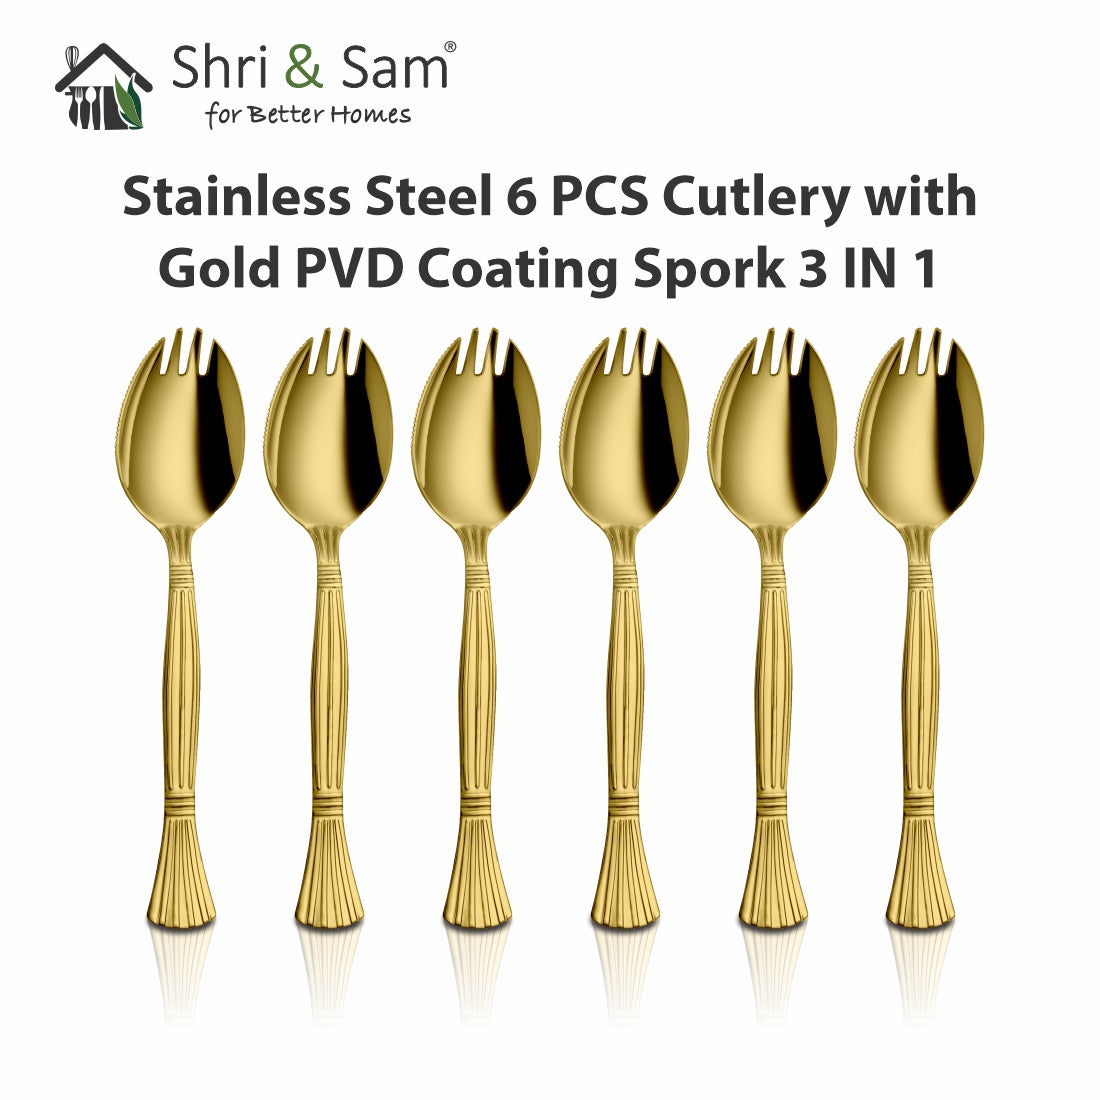 Stainless Steel 6 PCS Cutlery with Gold PVD Coating Spork 3 IN 1